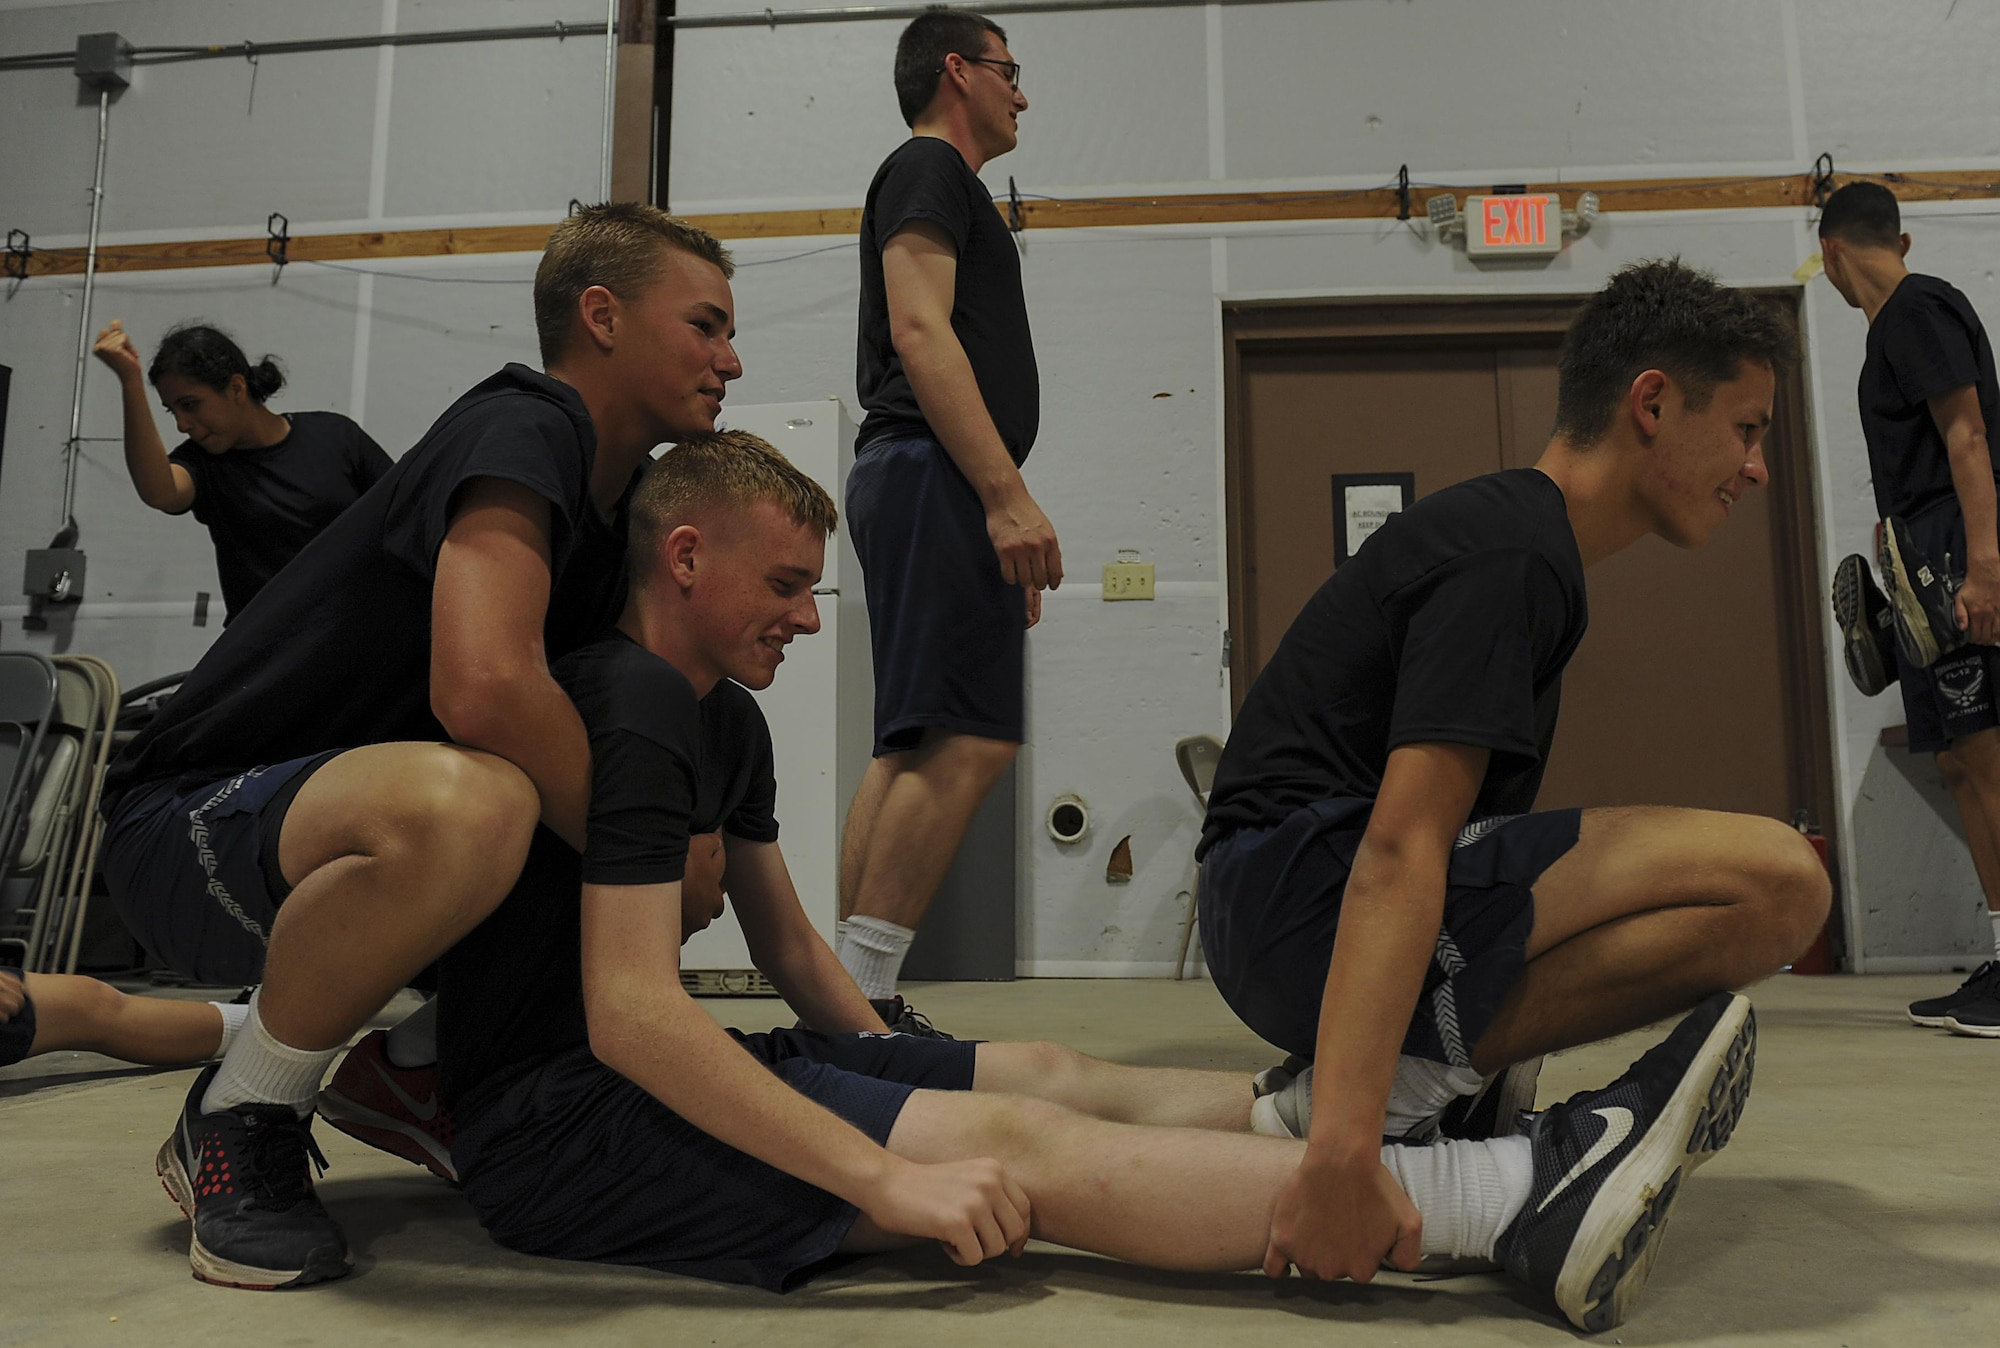 Junior ROTC cadets practice the "before and after" carry while learning patient movements at Hurlburt Field, Fla., June 29, 2017. The 1st Special Operations Aerospace Medicine Squadron paired with more than 50 cadets to teach the basics of self-aid and buddy care during a Summer Leadership Course at Hurlburt Field. (U.S. Air Force photo by Airman 1st Class Rachel Yates)